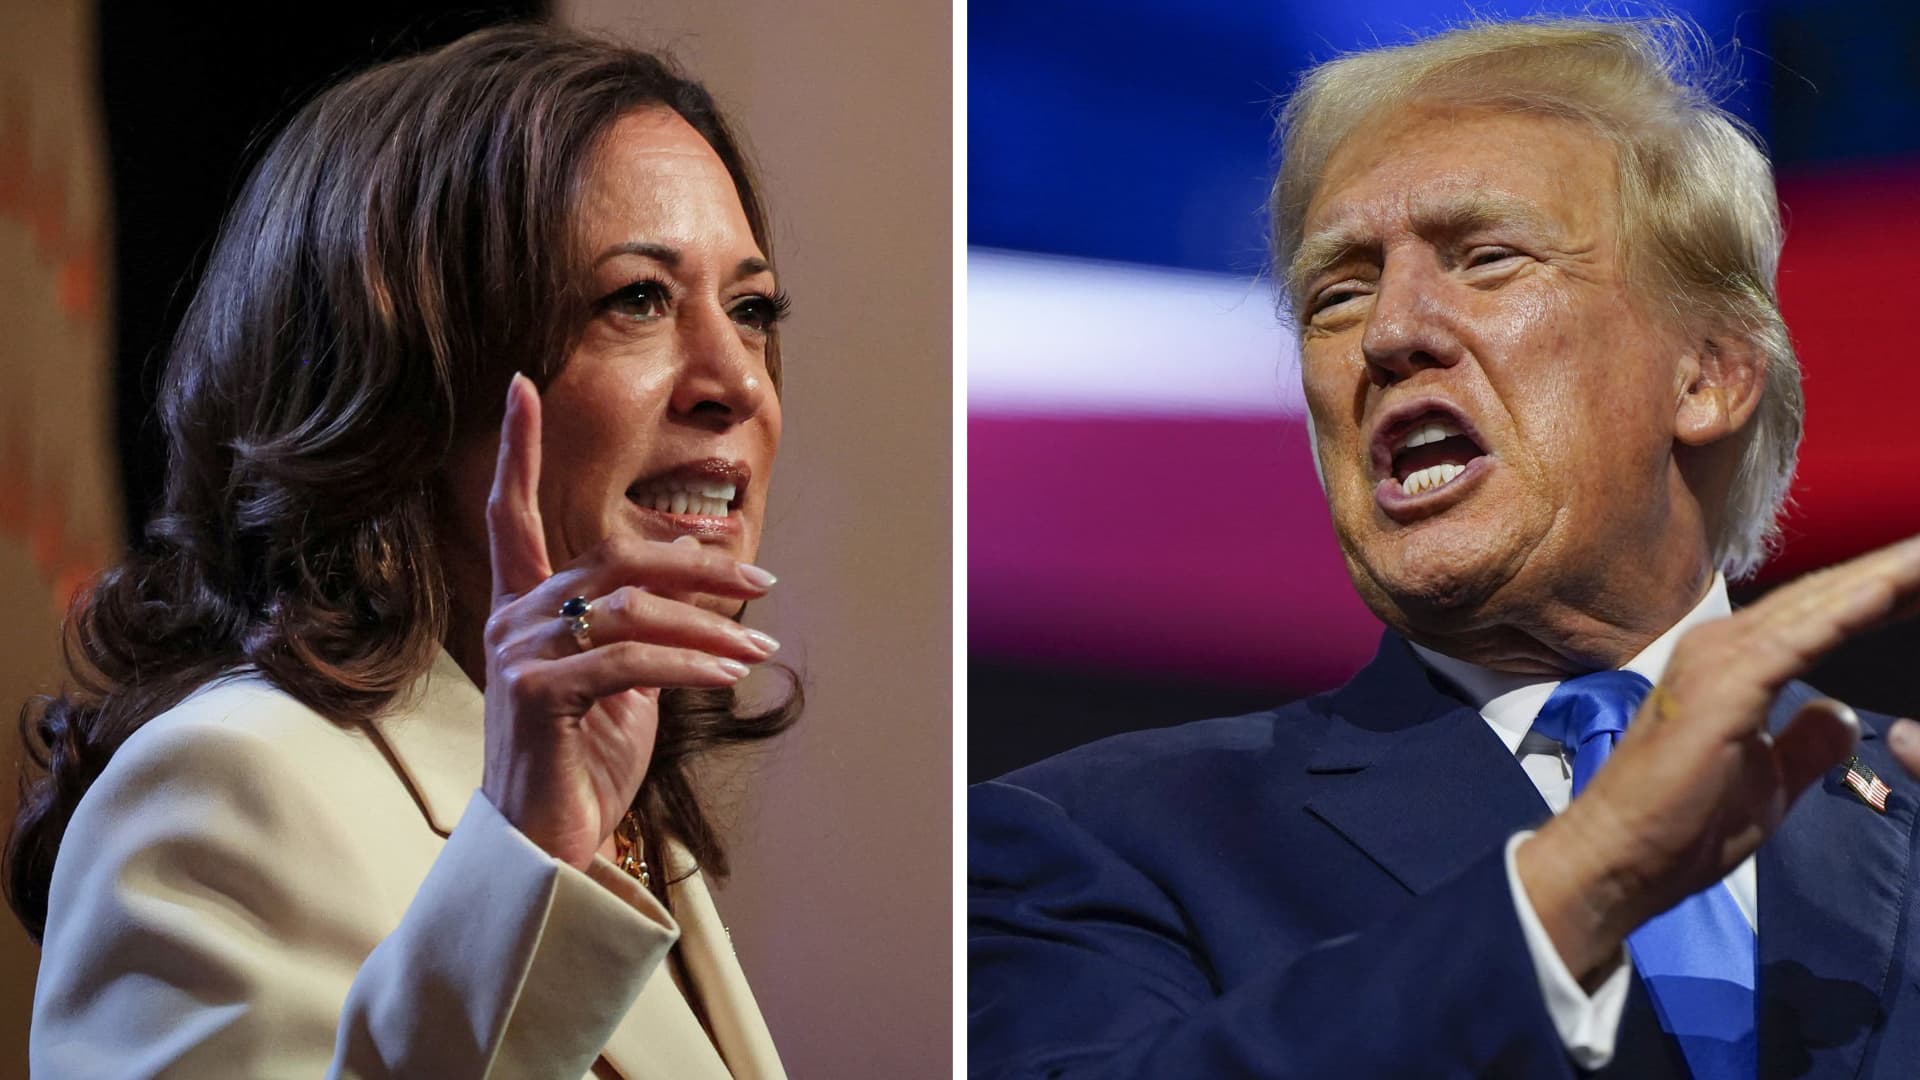 Fox News invites Harris and Trump for a debate in September